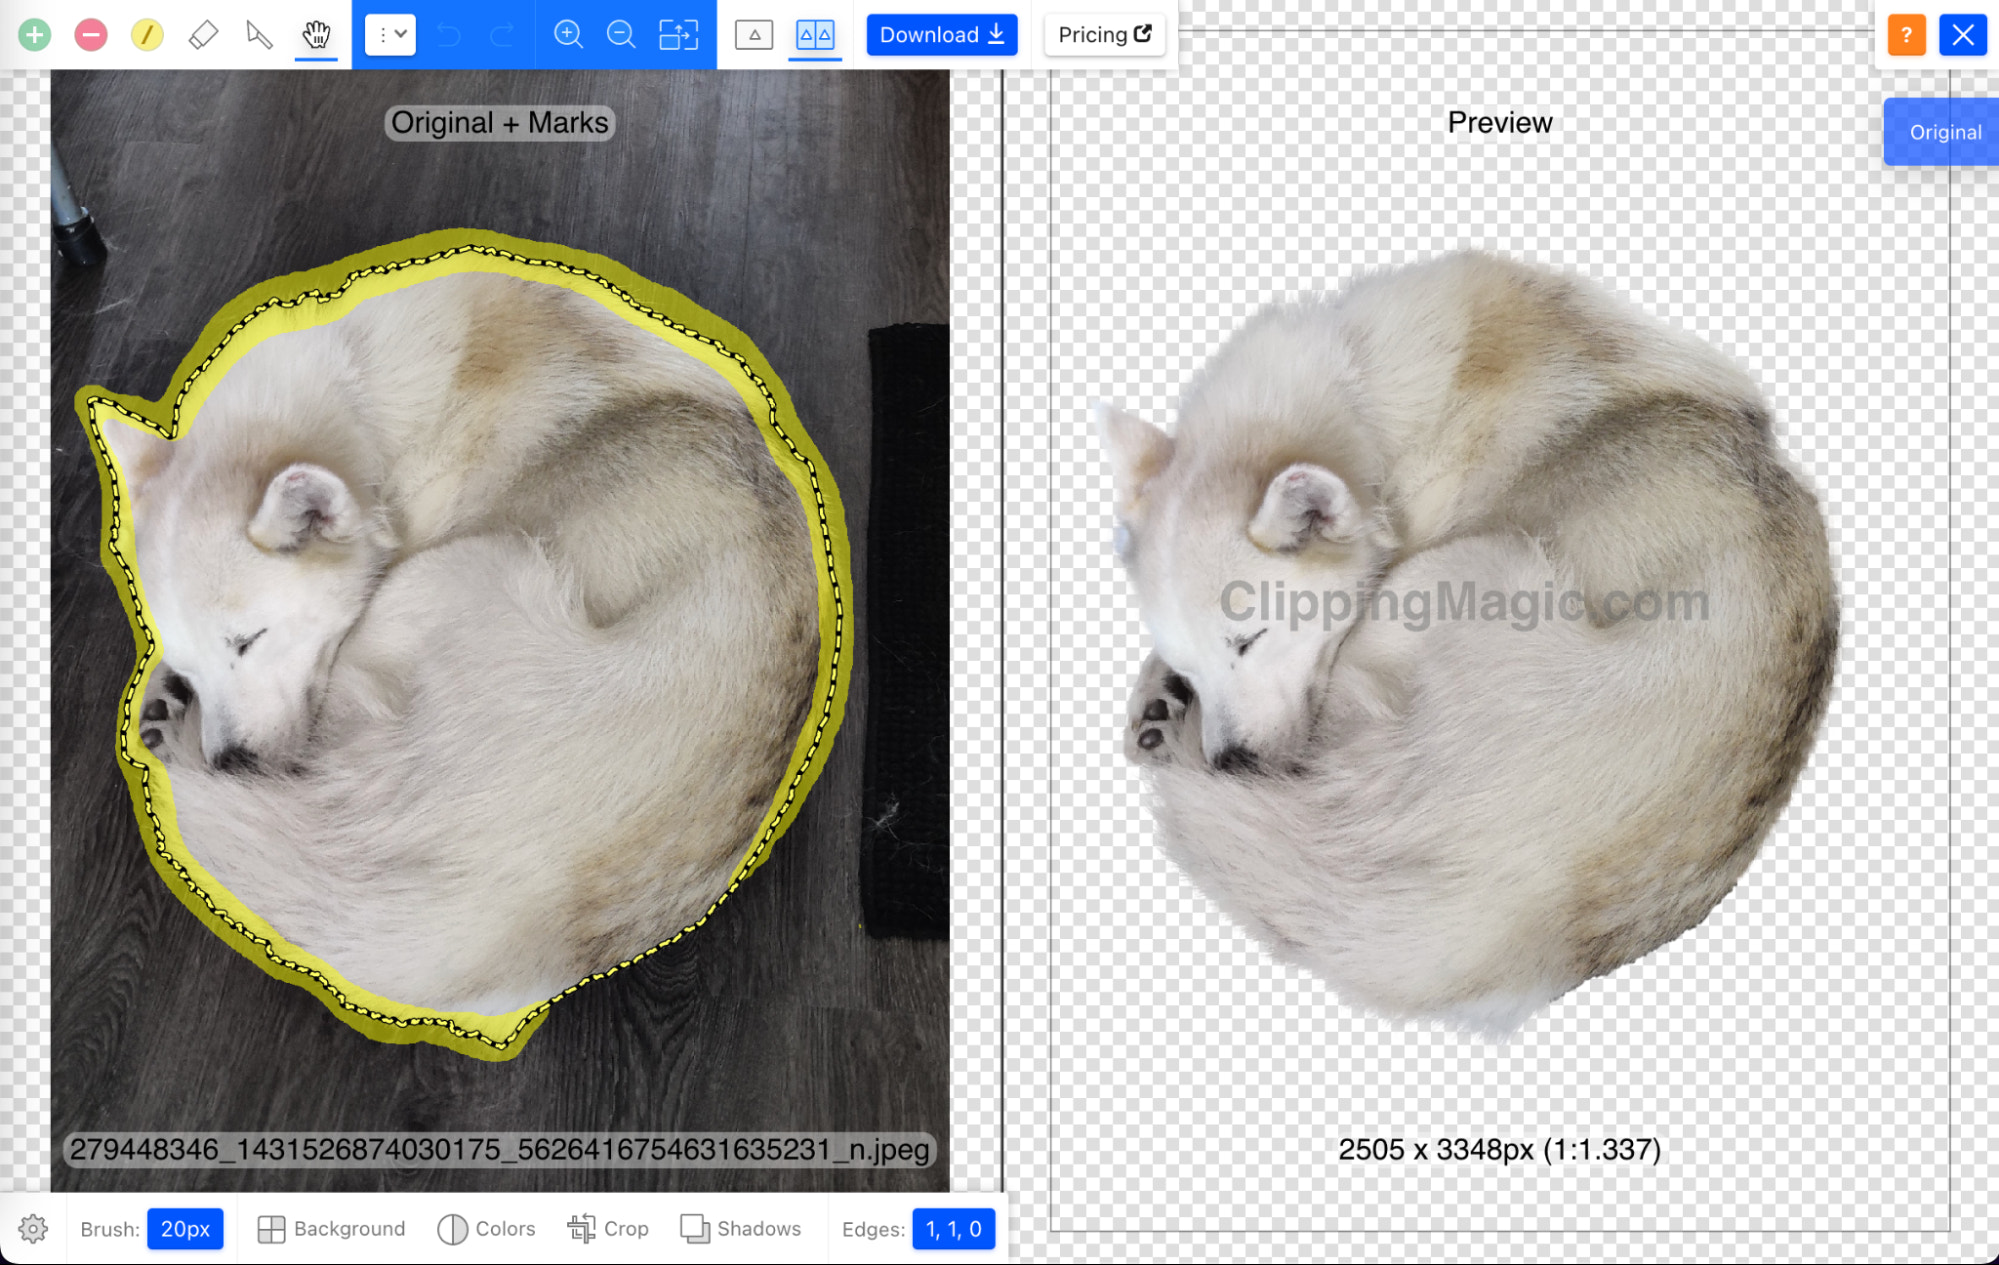 Make an Image Transparent - Easy Online Tool